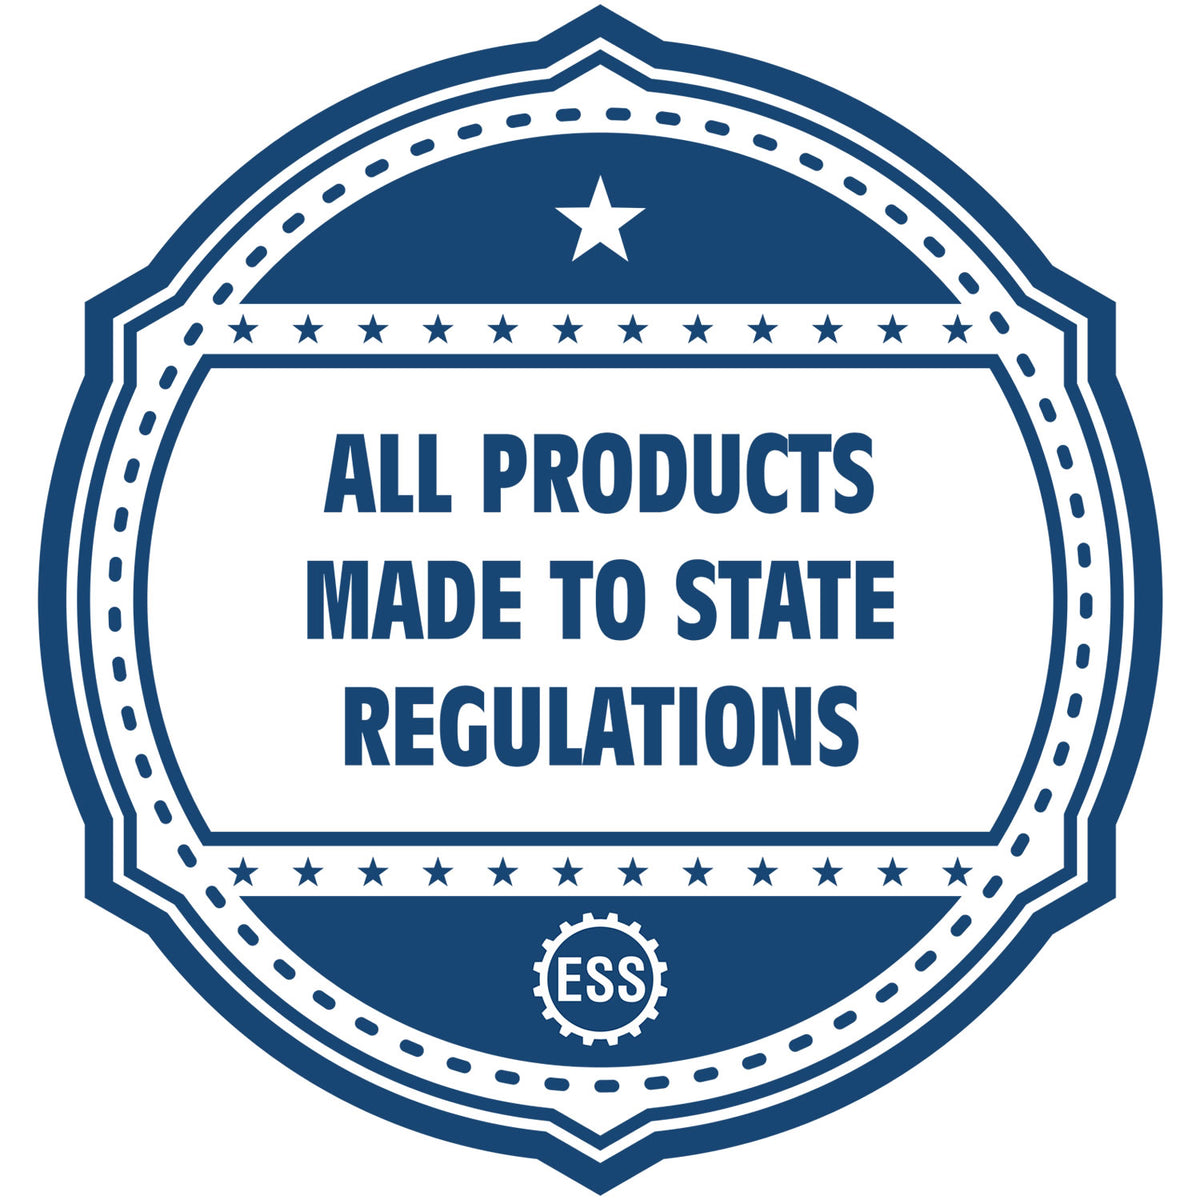 A blue icon or badge for the Self-Inking Nevada Geologist Stamp showing that this product is made in compliance with state regulations.